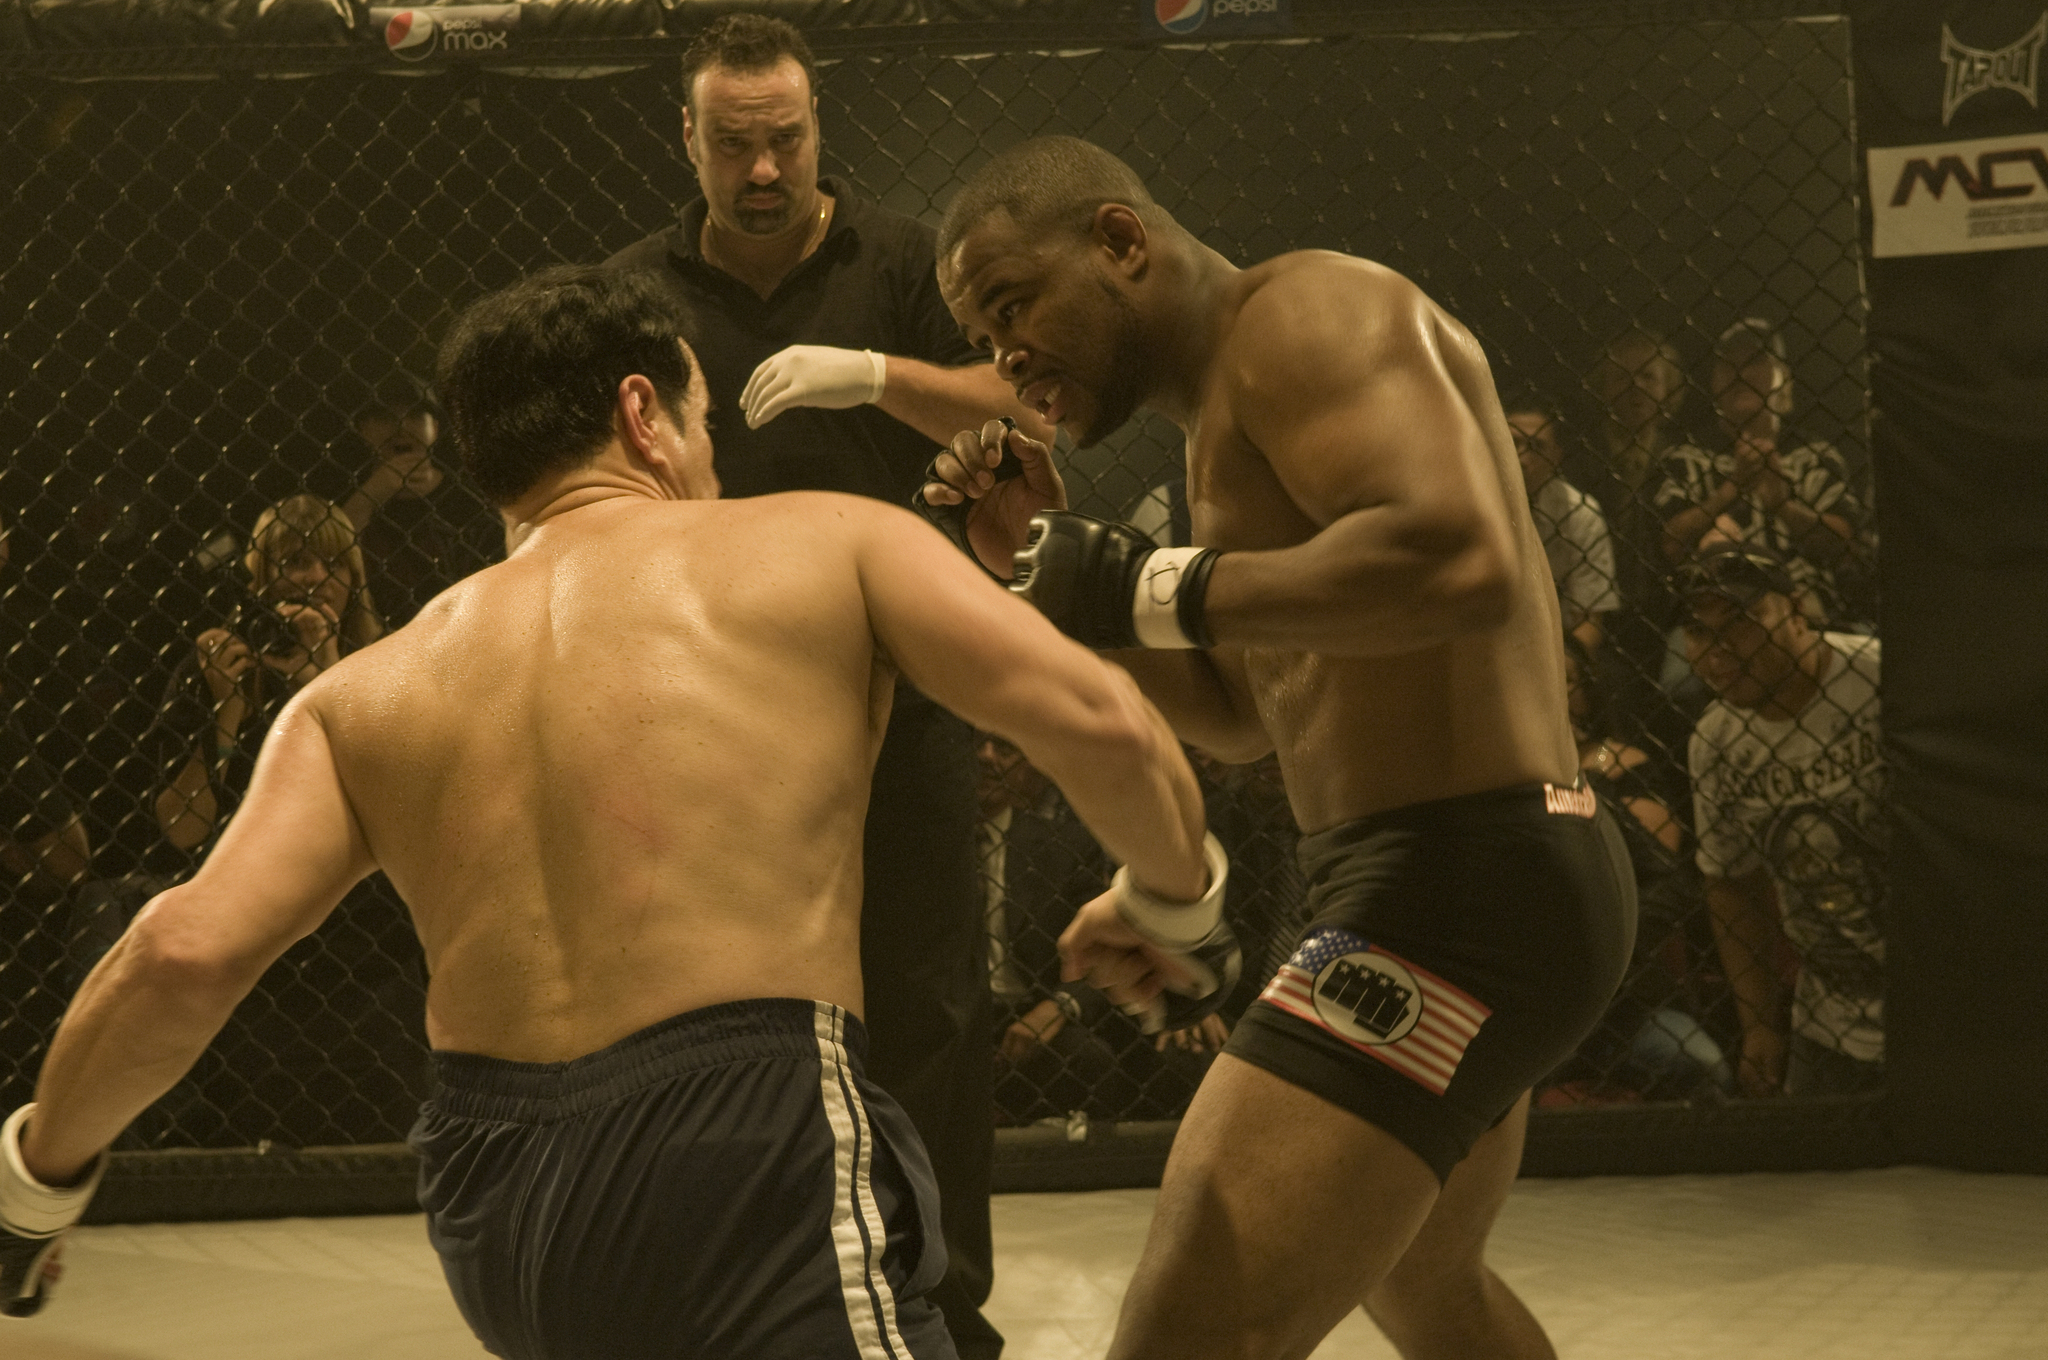 Still of Hector Echavarria and Rashad Evans in Unrivaled (2010)